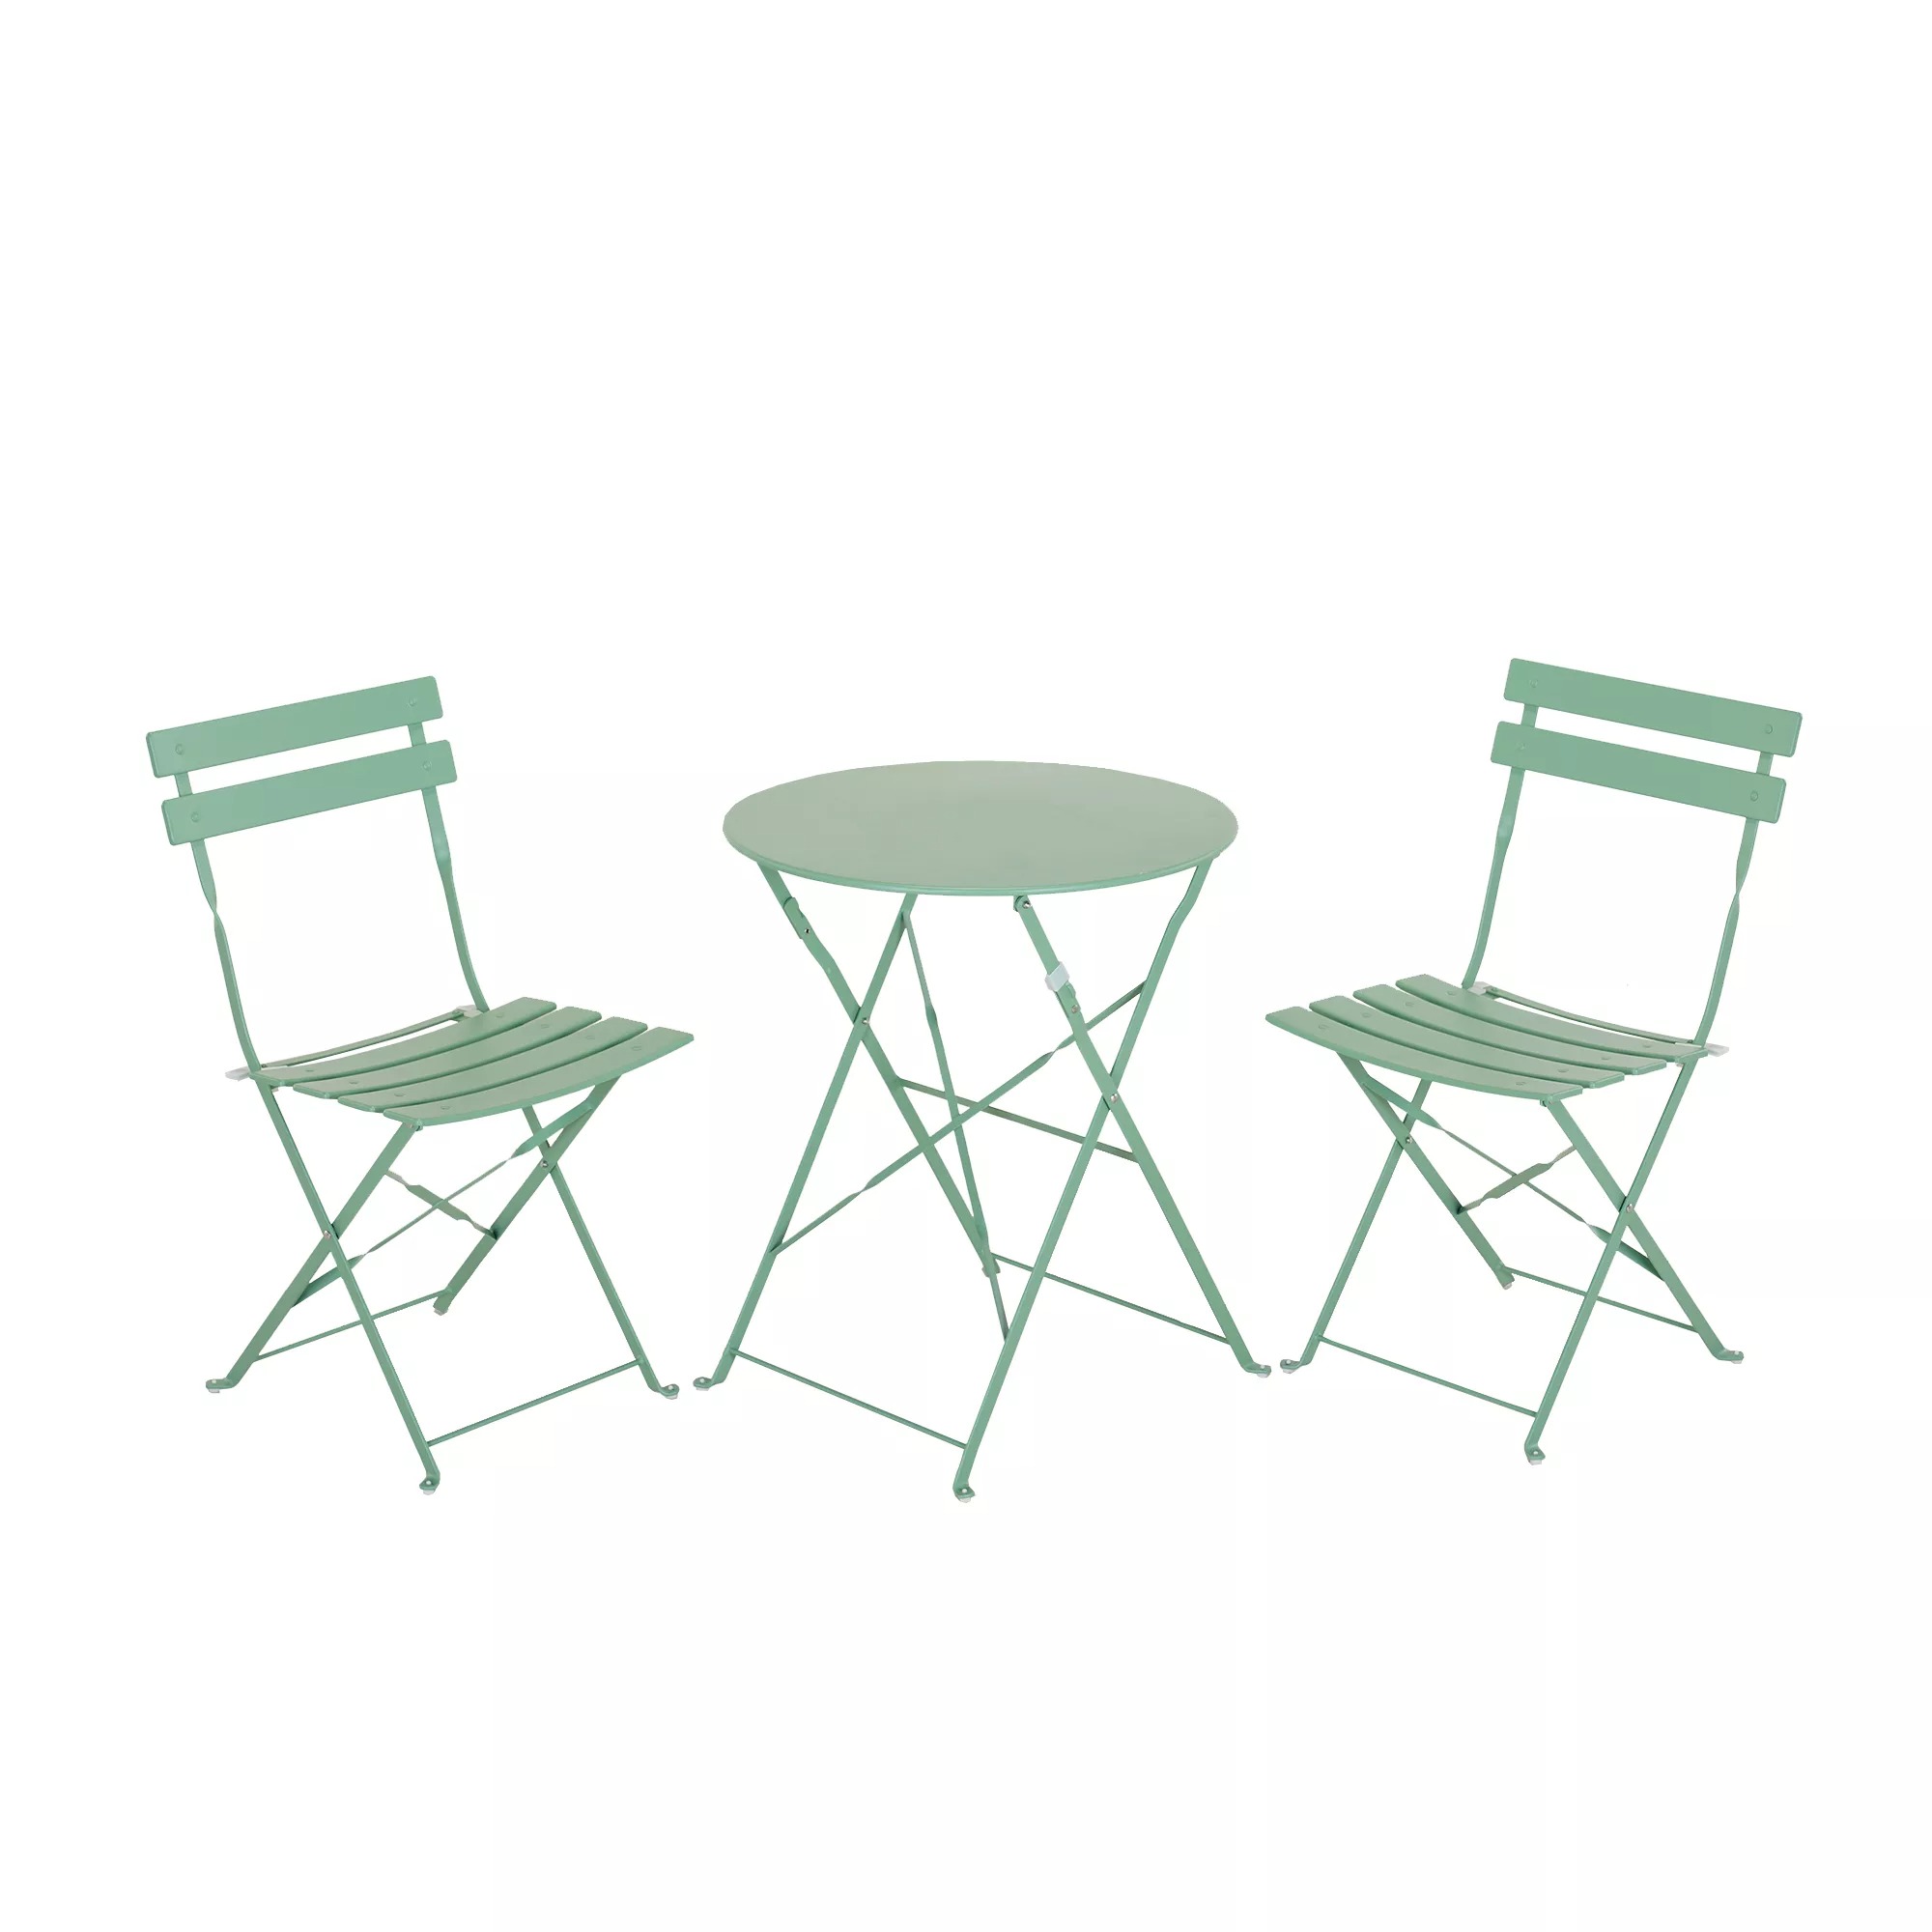 3-Piece Powder-Coated Iron Bistro Set of Foldable Garden Table and Chairs